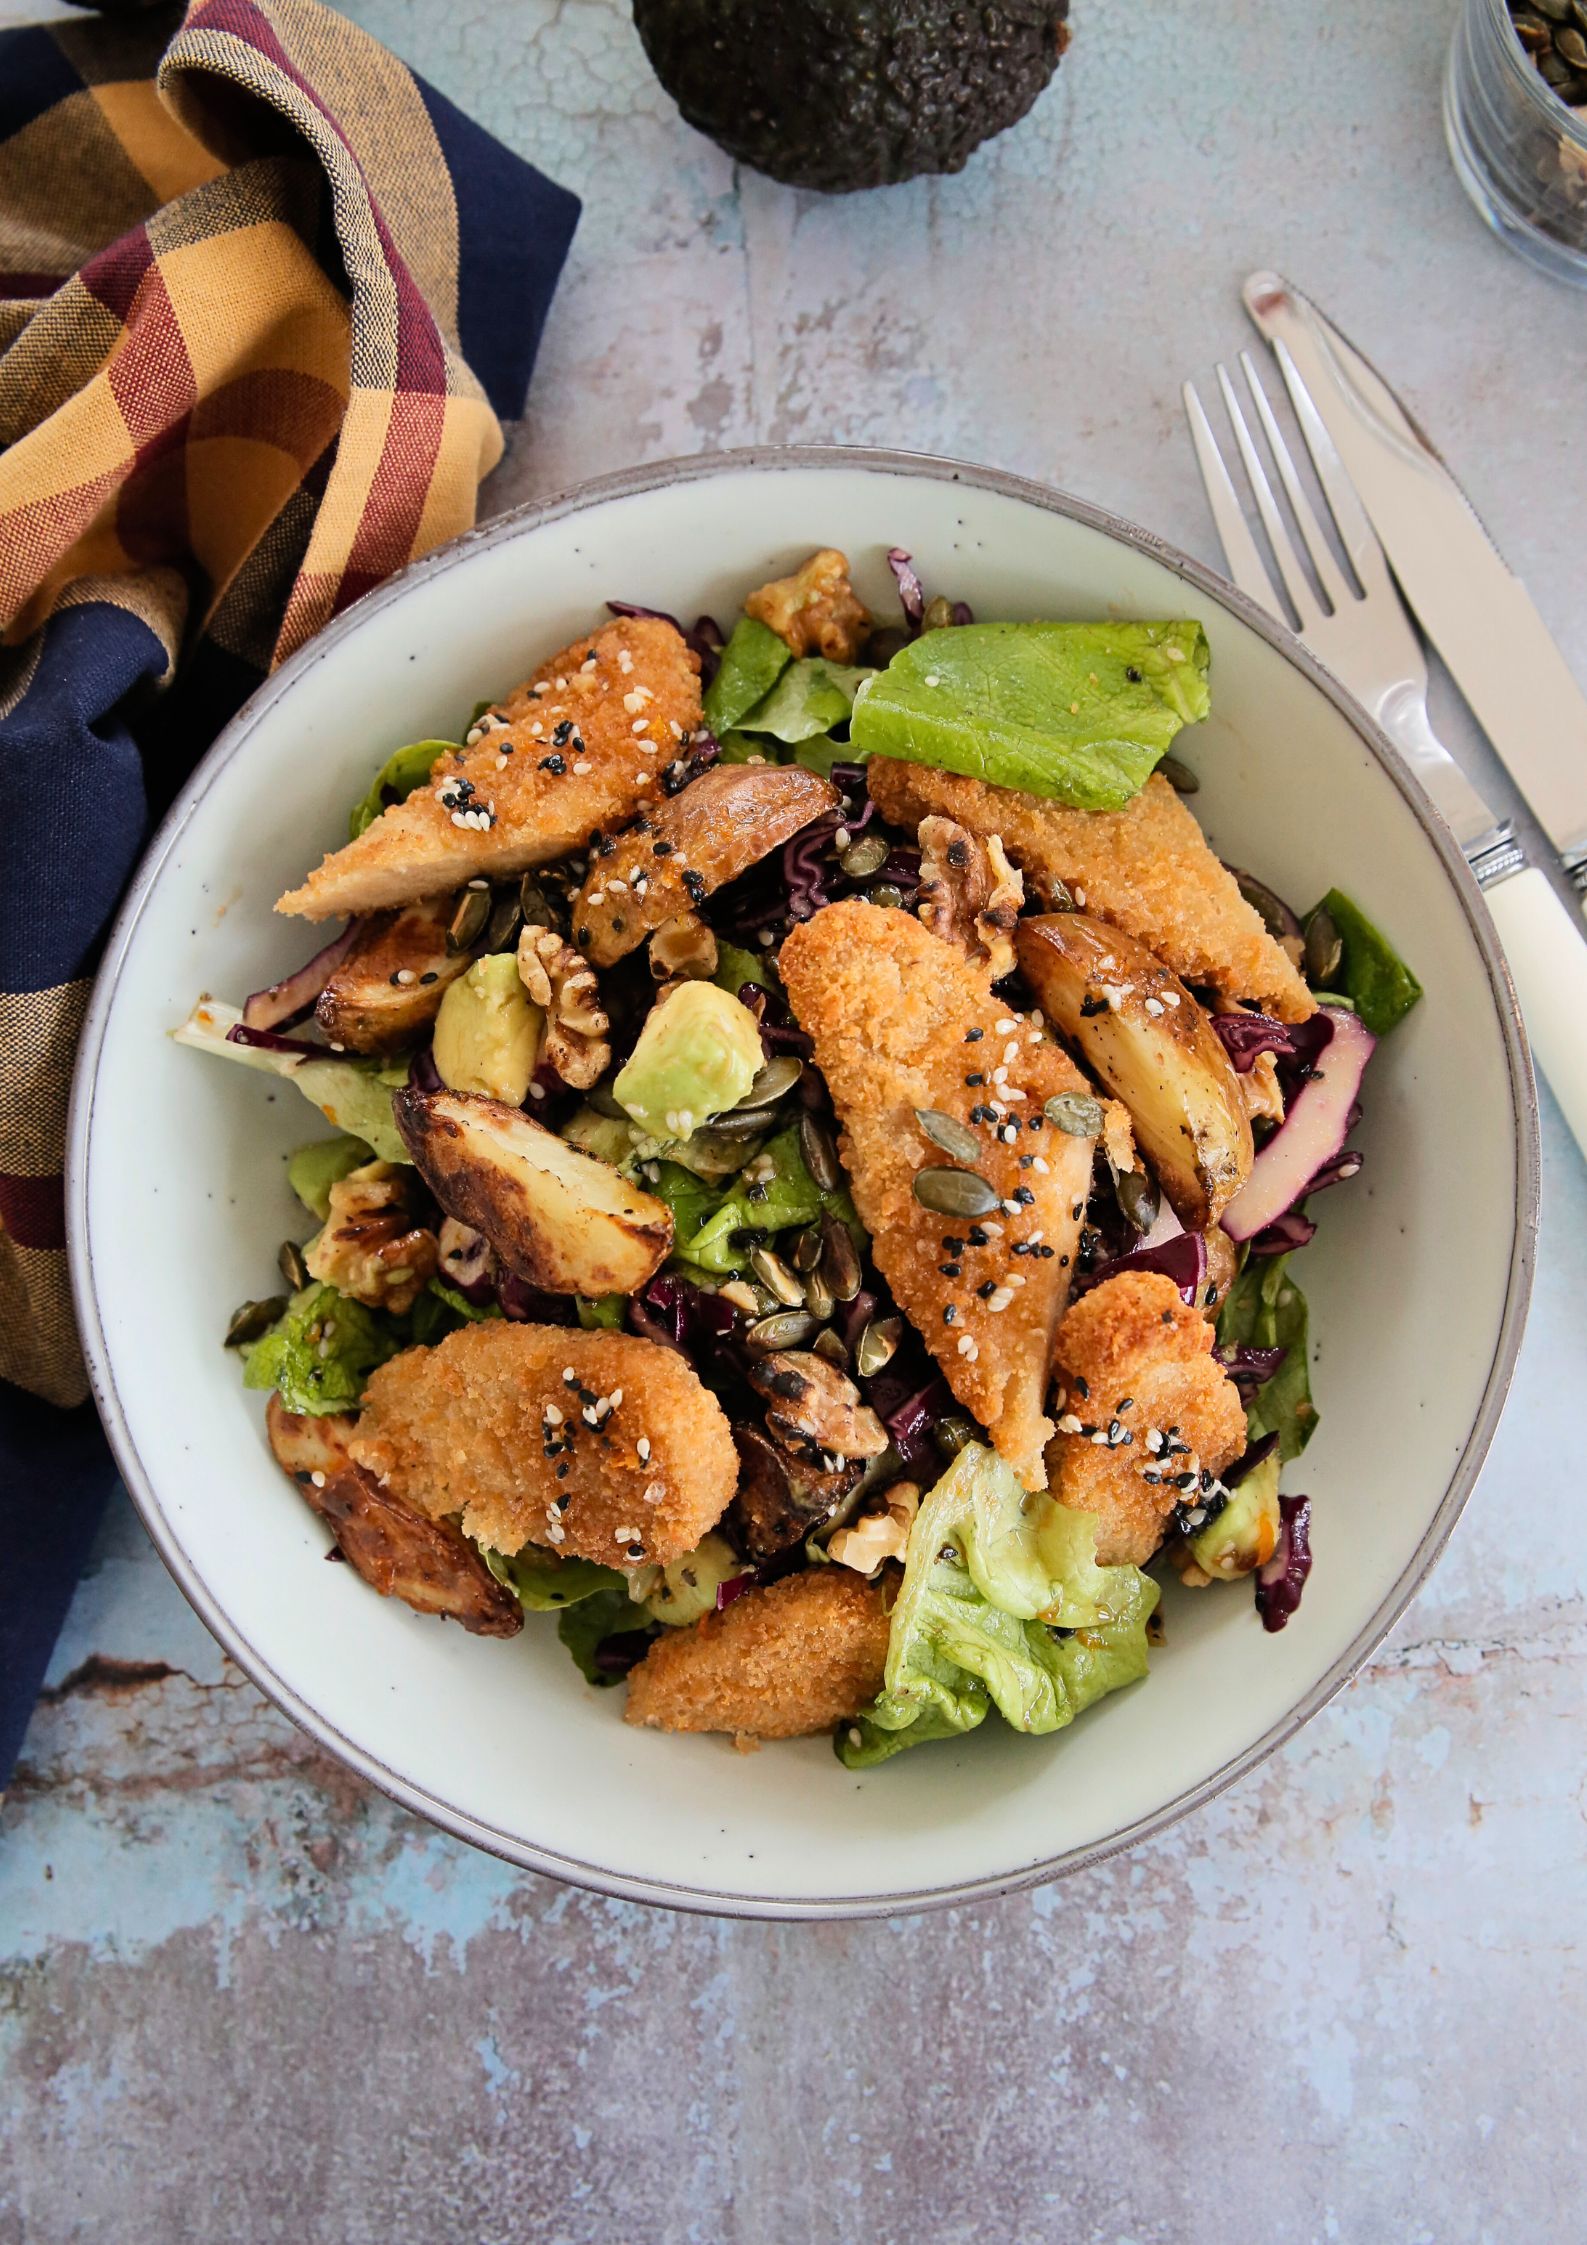 A warm winter vegan salad recipe with crunchy fresh veggies, plant based chicken tenders and a spiced sesame orange salad dressing. A totally delicious but easy vegan lunch idea. Recipe on thecookandhim.com | #vegansaladrecipes #vegansaladdressing #saladrecipes #meatlessmeal #plantbasedrecipes